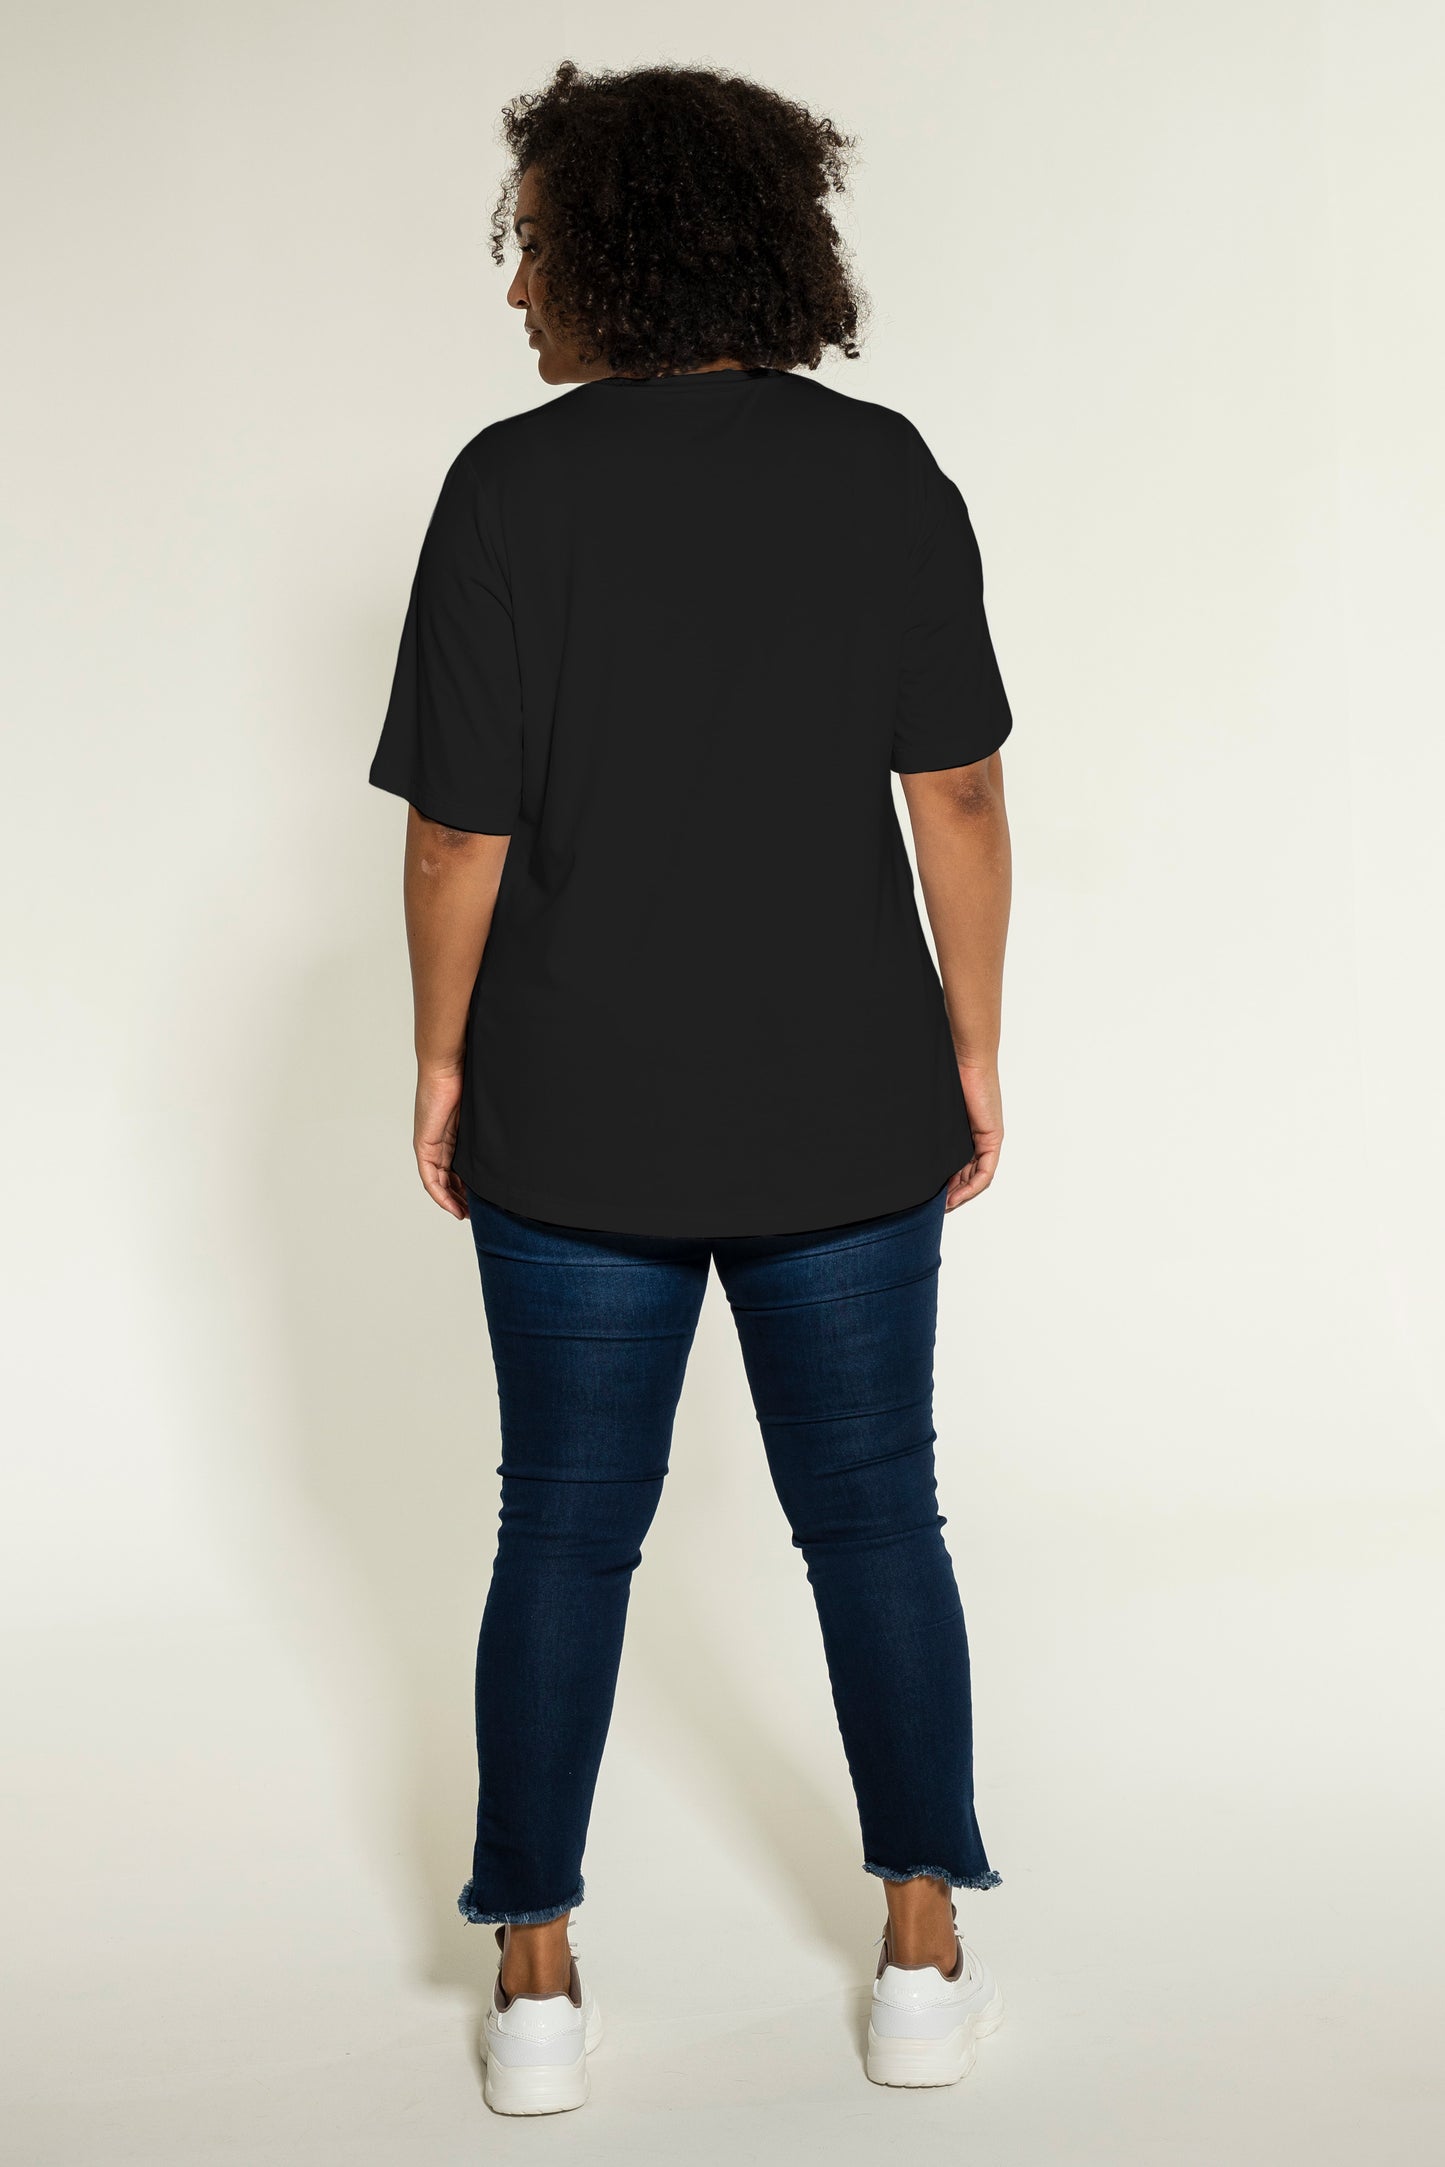 Studio Lusy T-shirt with print T-Shirt Black with print